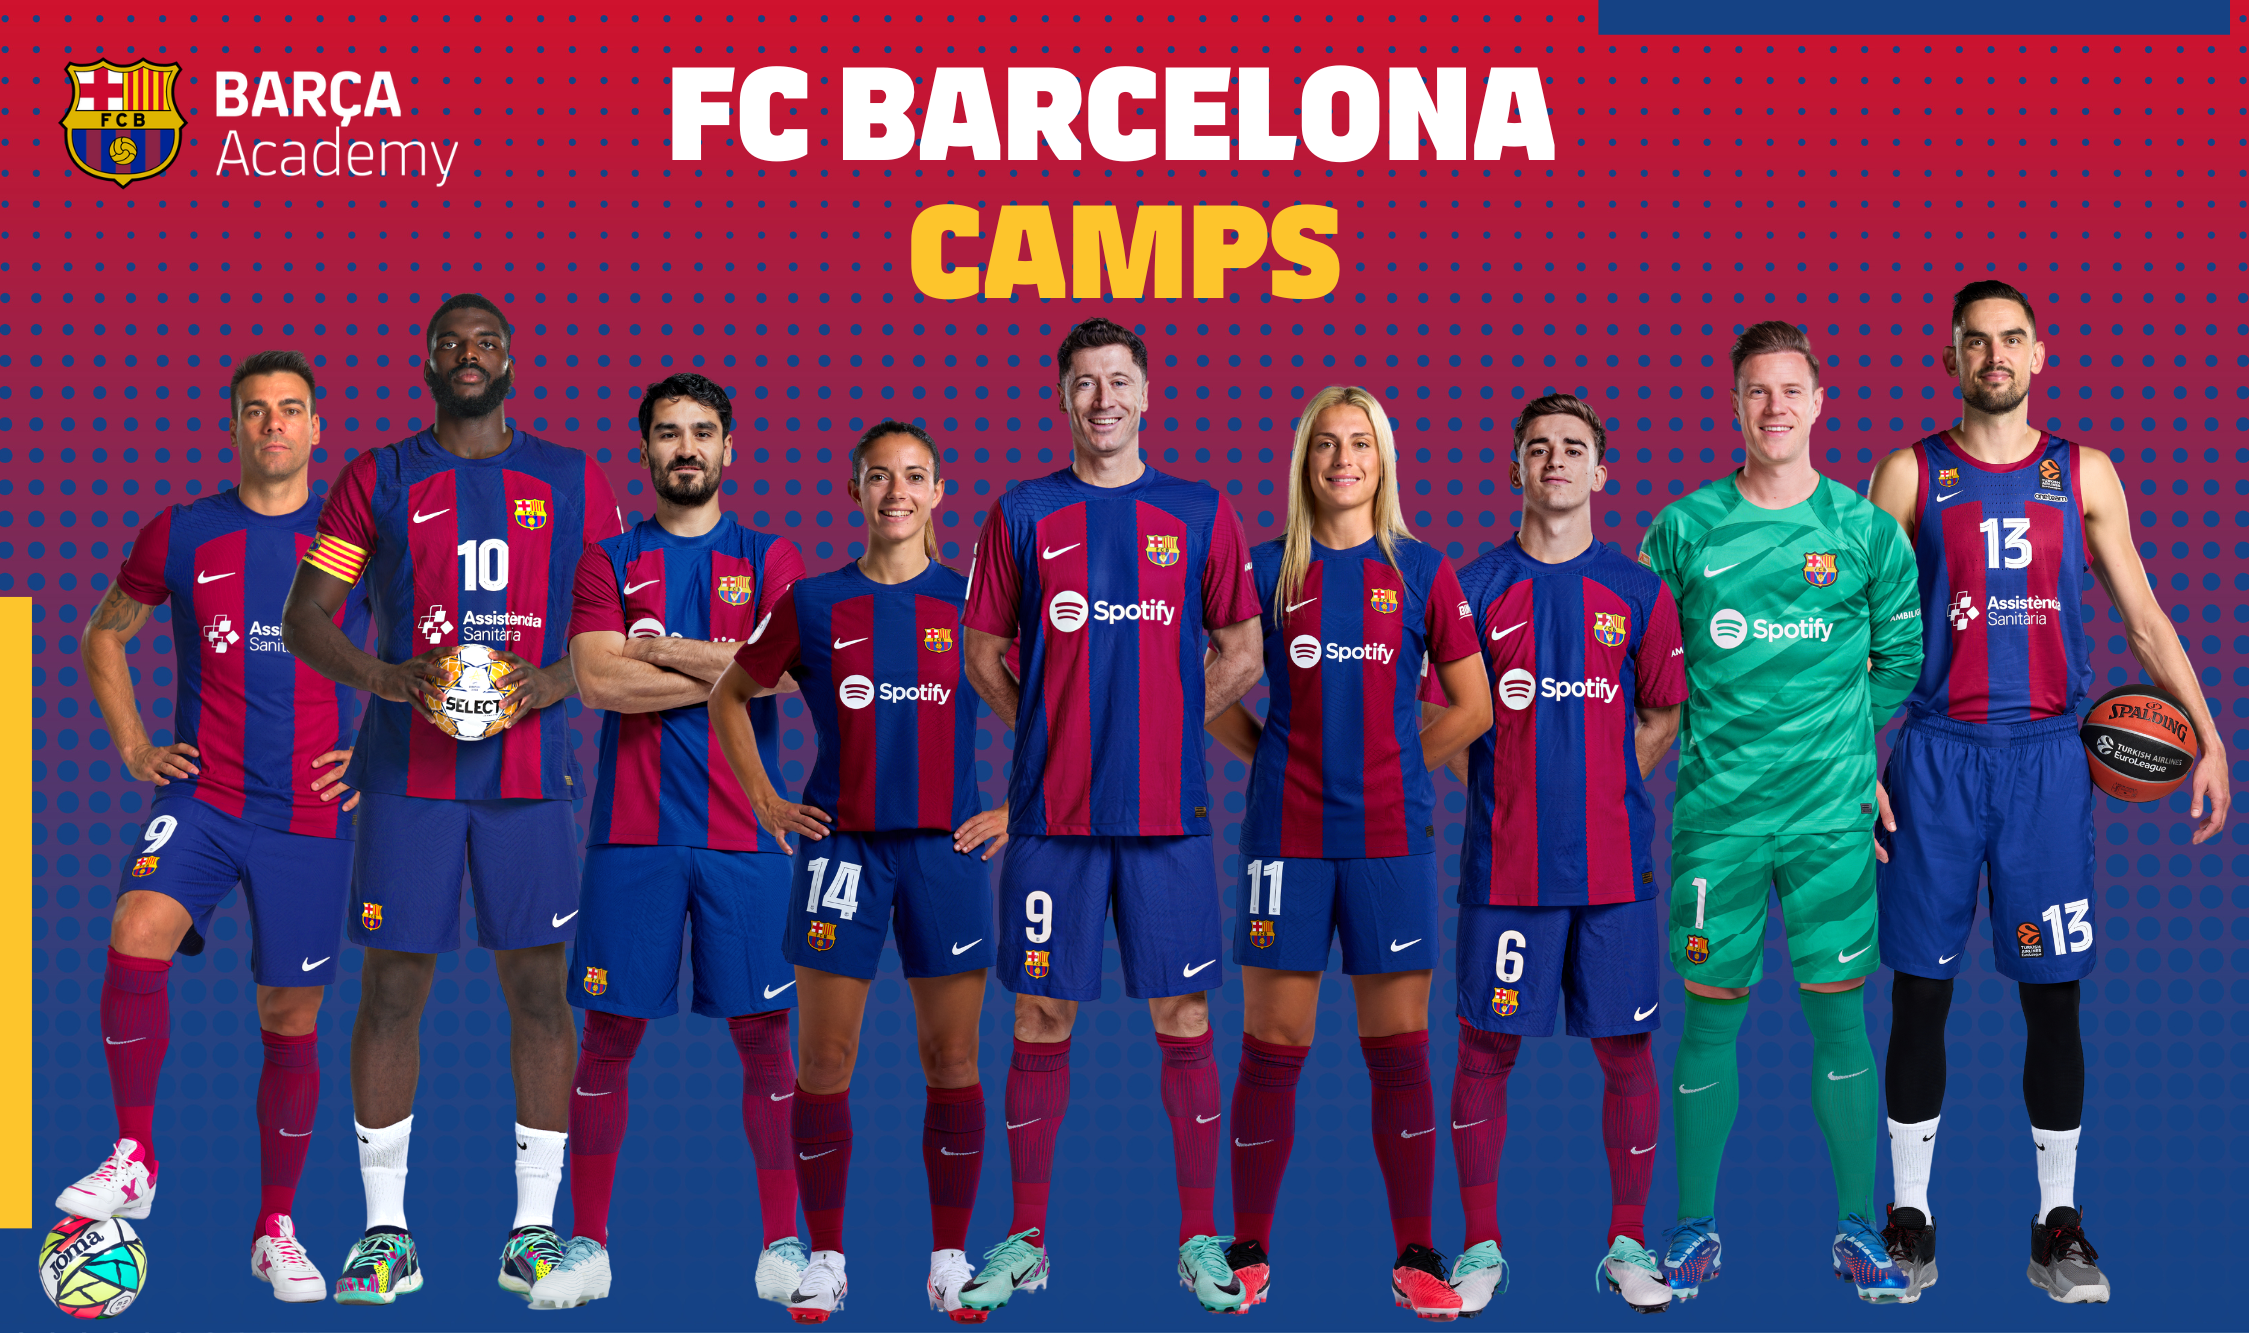 Players from FC Barcelona